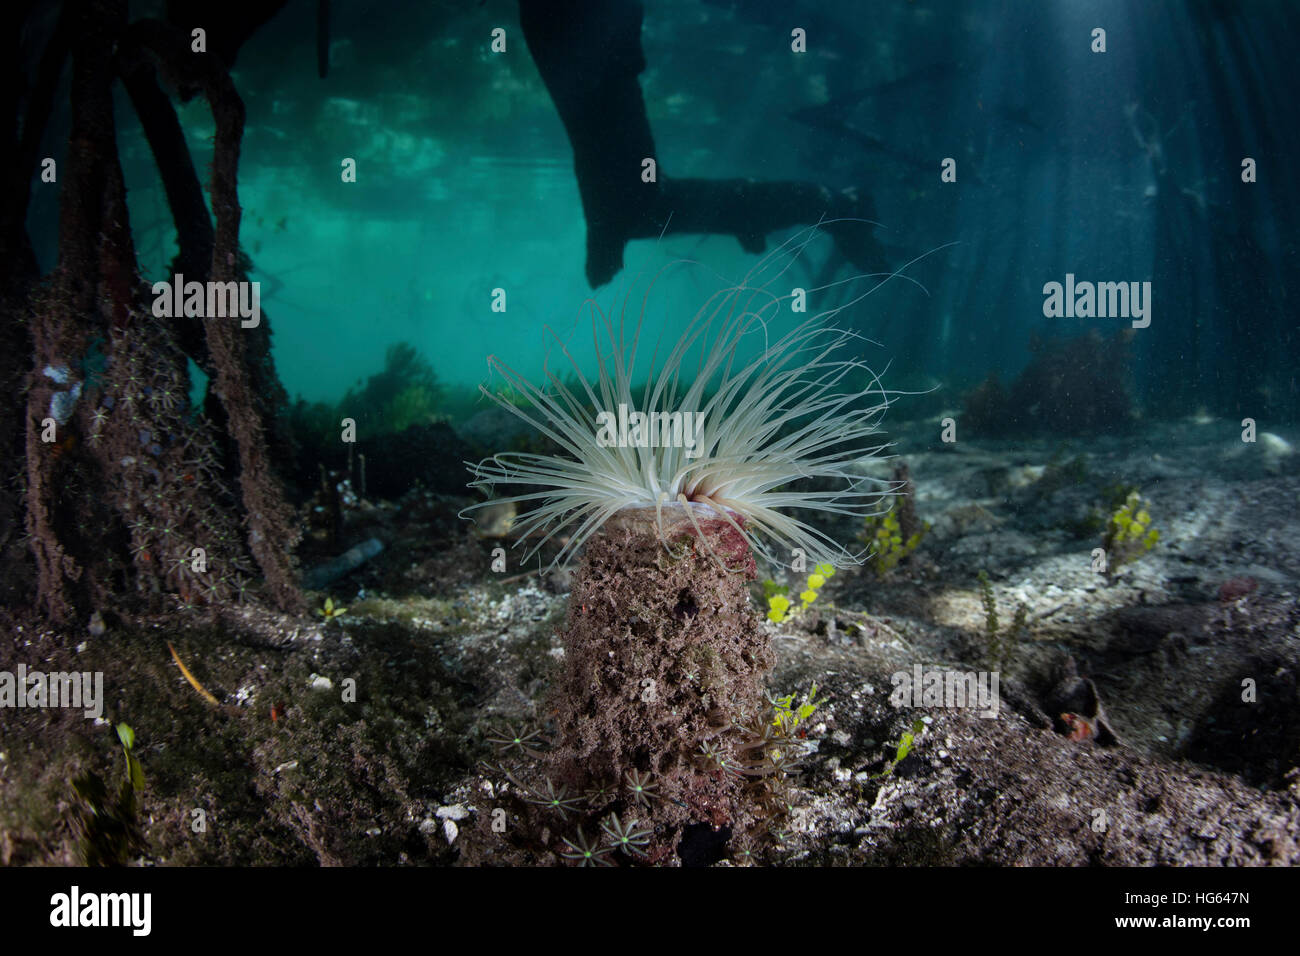 A tube anemone grows in a blue water mangrove forest in Raja Ampat, Indonesia. Stock Photo